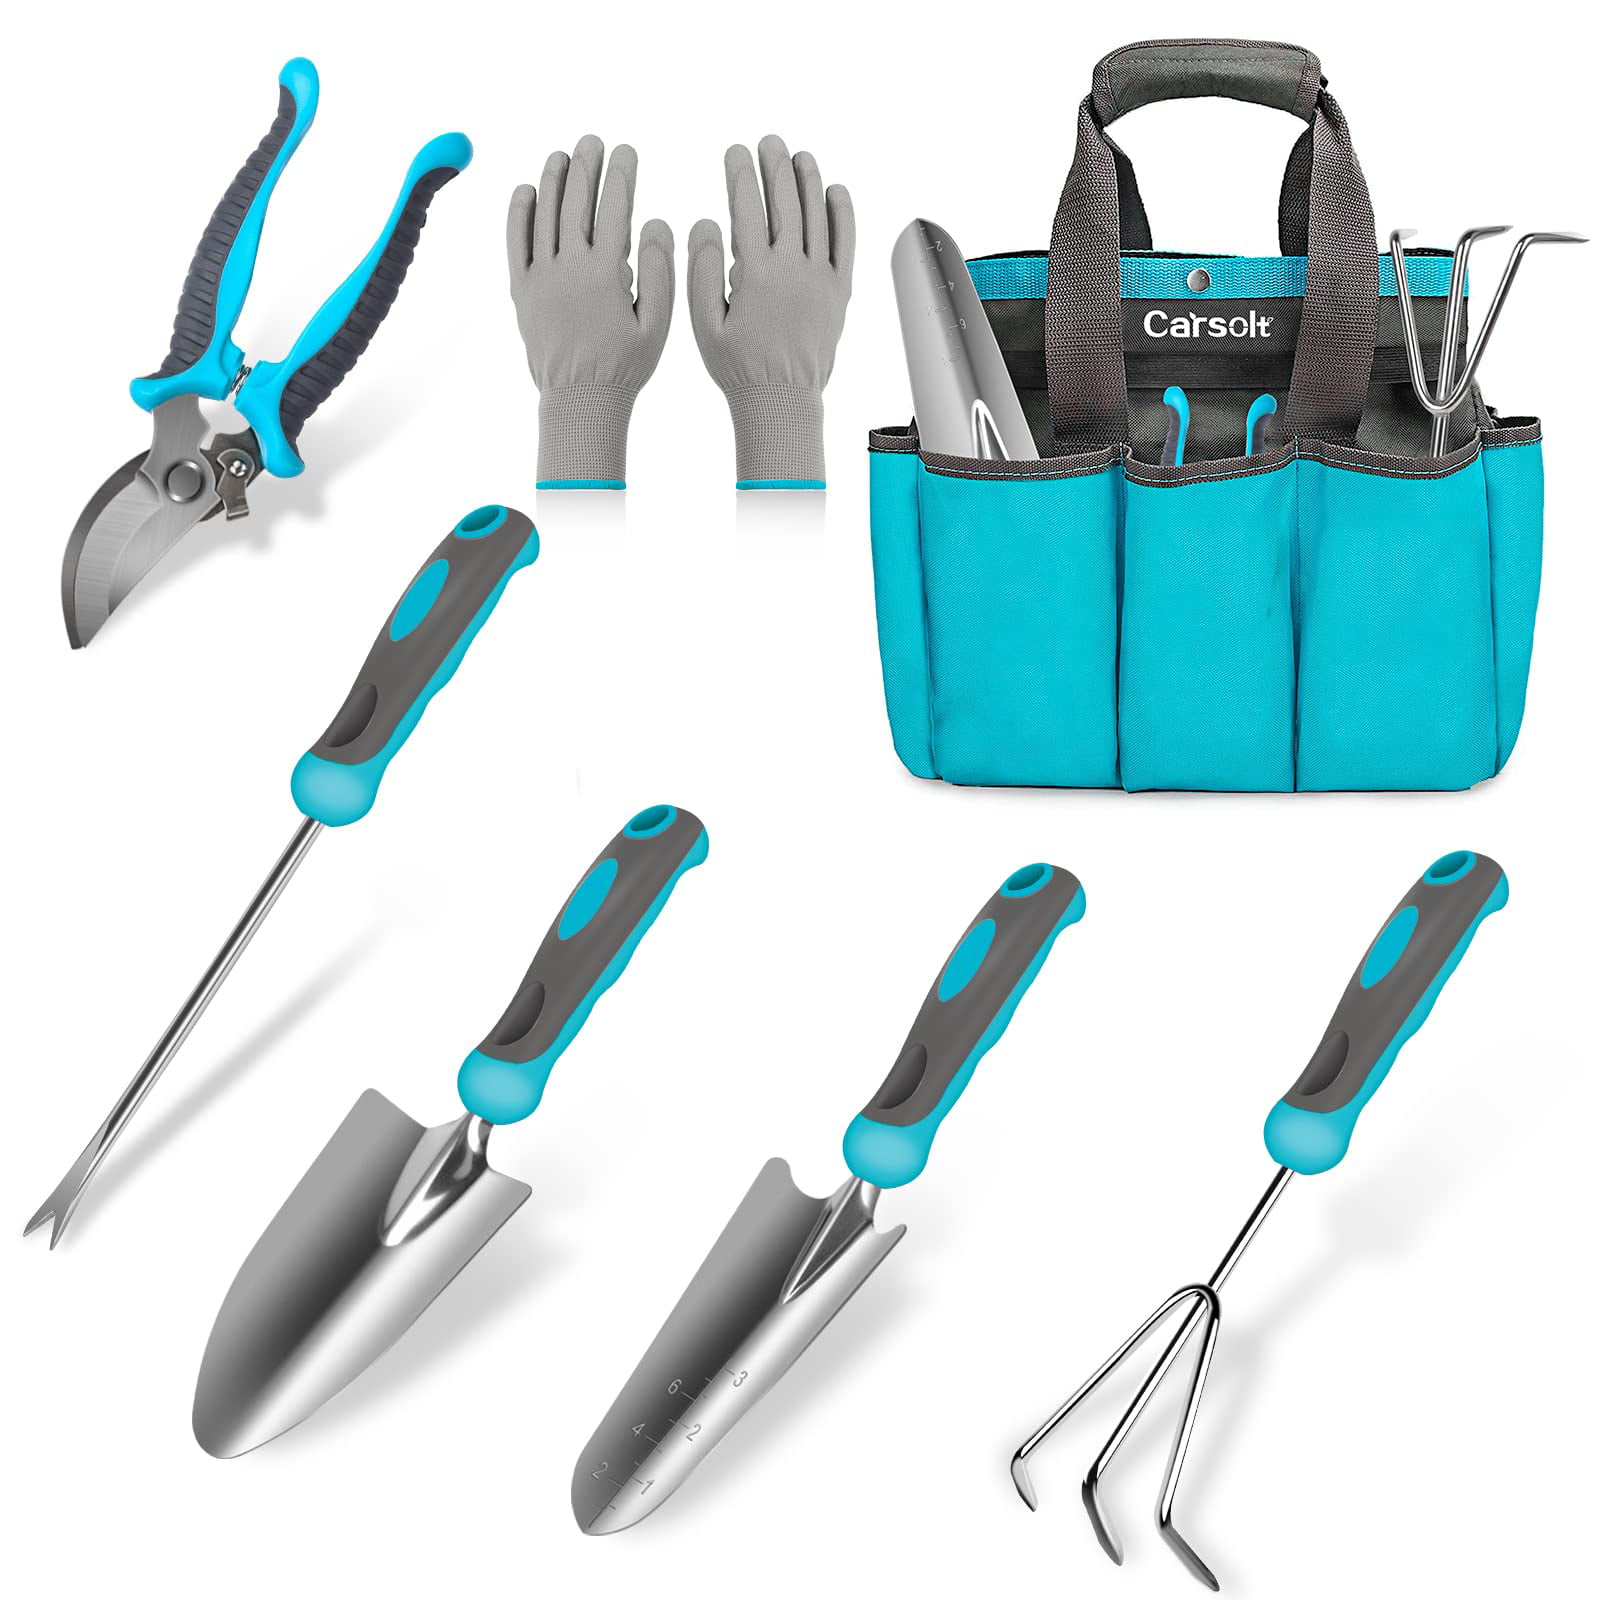 Carsolt Gardening Gifts for Women, Gifts For Mum with Garden Tools Set,  Gloves